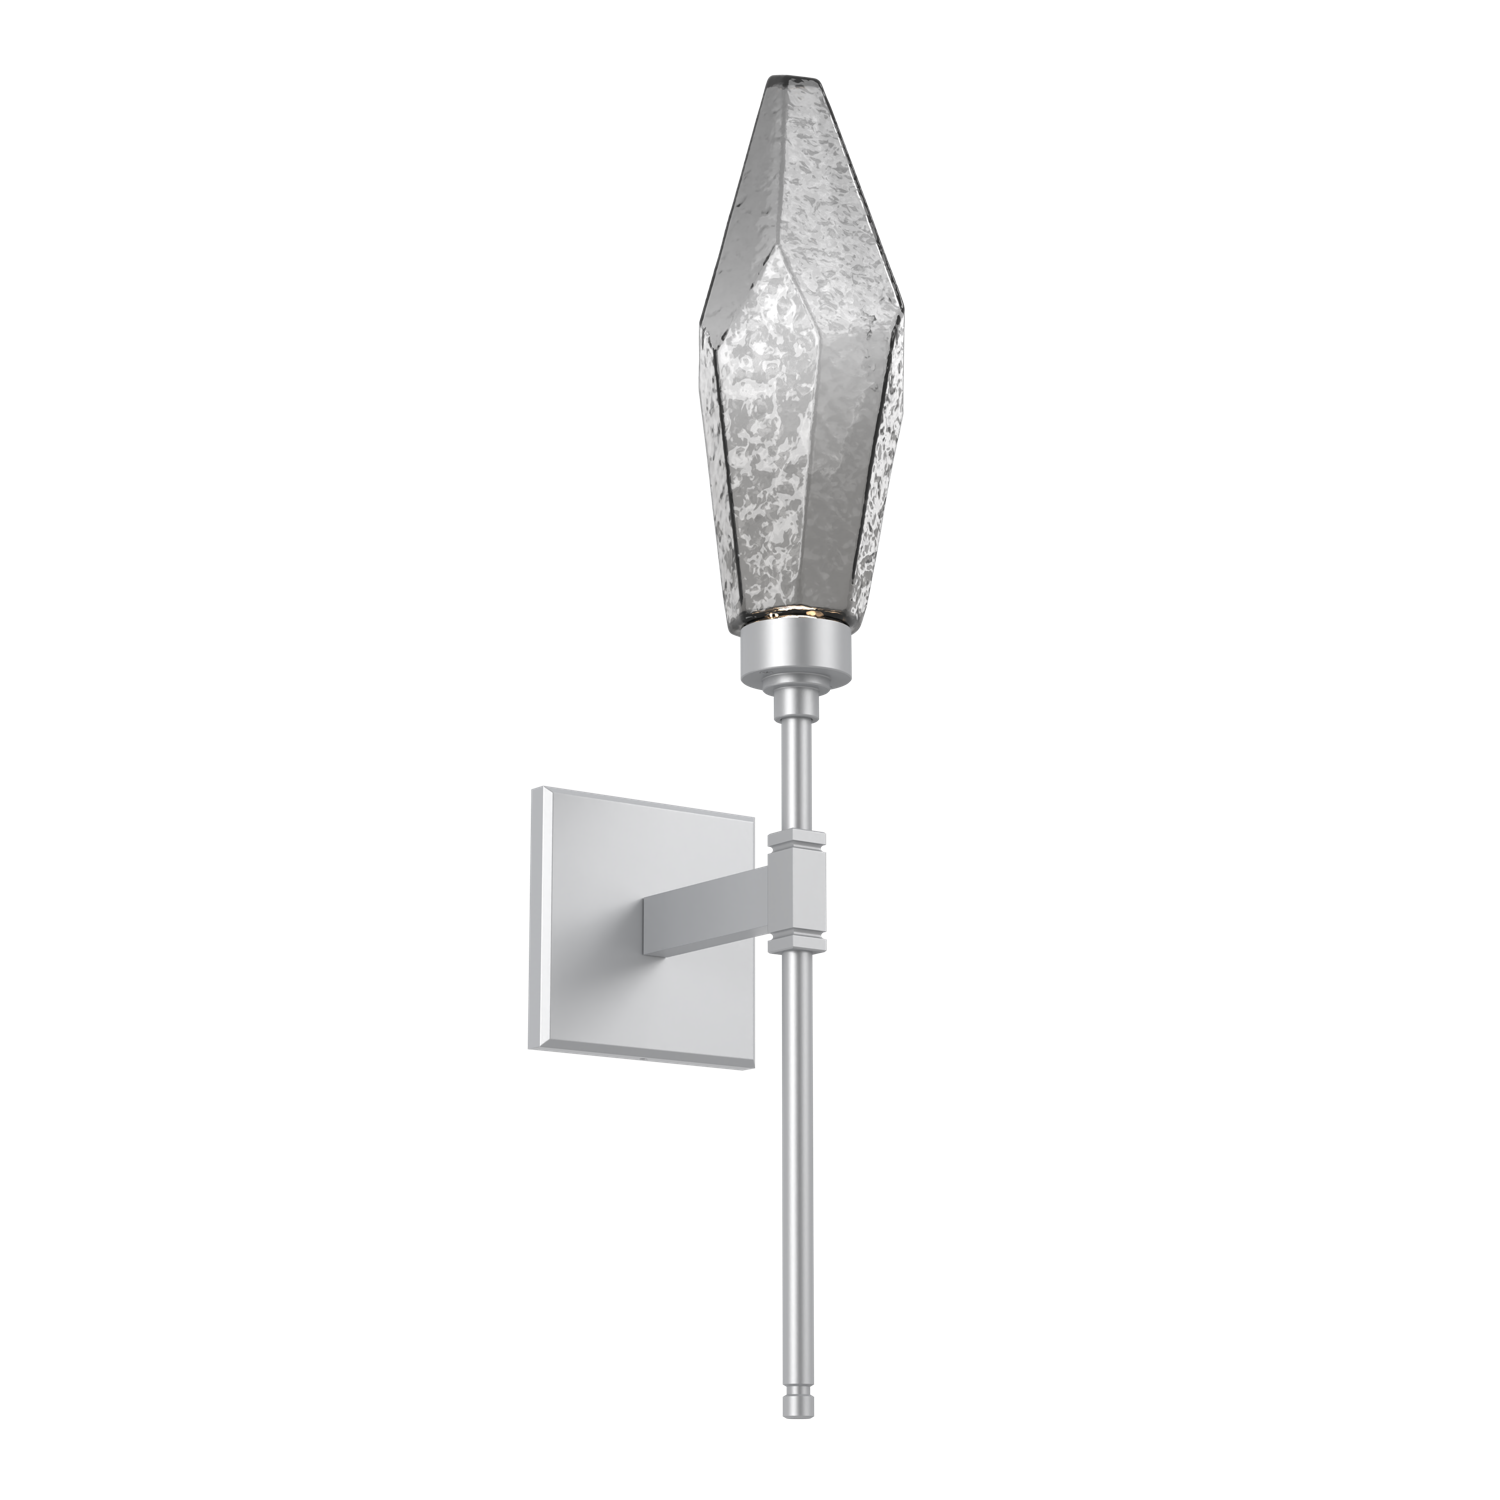 IDB0050-07-CS-CS-Hammerton-Studio-Rock-Crystal-belvedere-wall-sconce-with-classic-silver-finish-and-chilled-smoke-glass-shades-and-LED-lamping